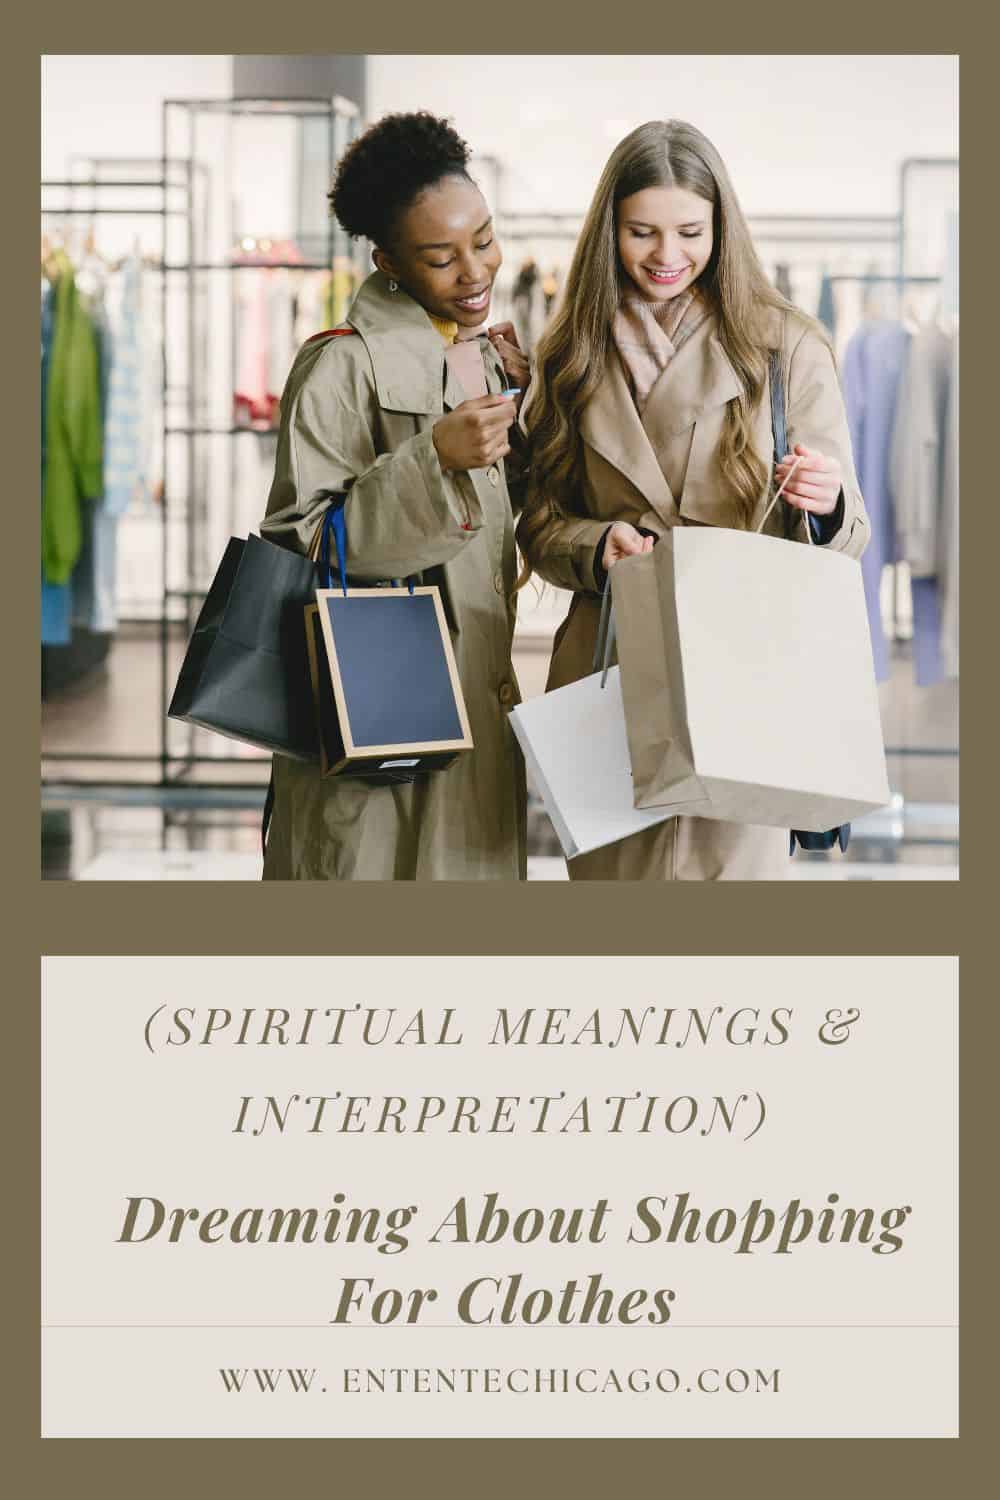 Specific Scenarios Of Shopping In your Dream And Their Meaning